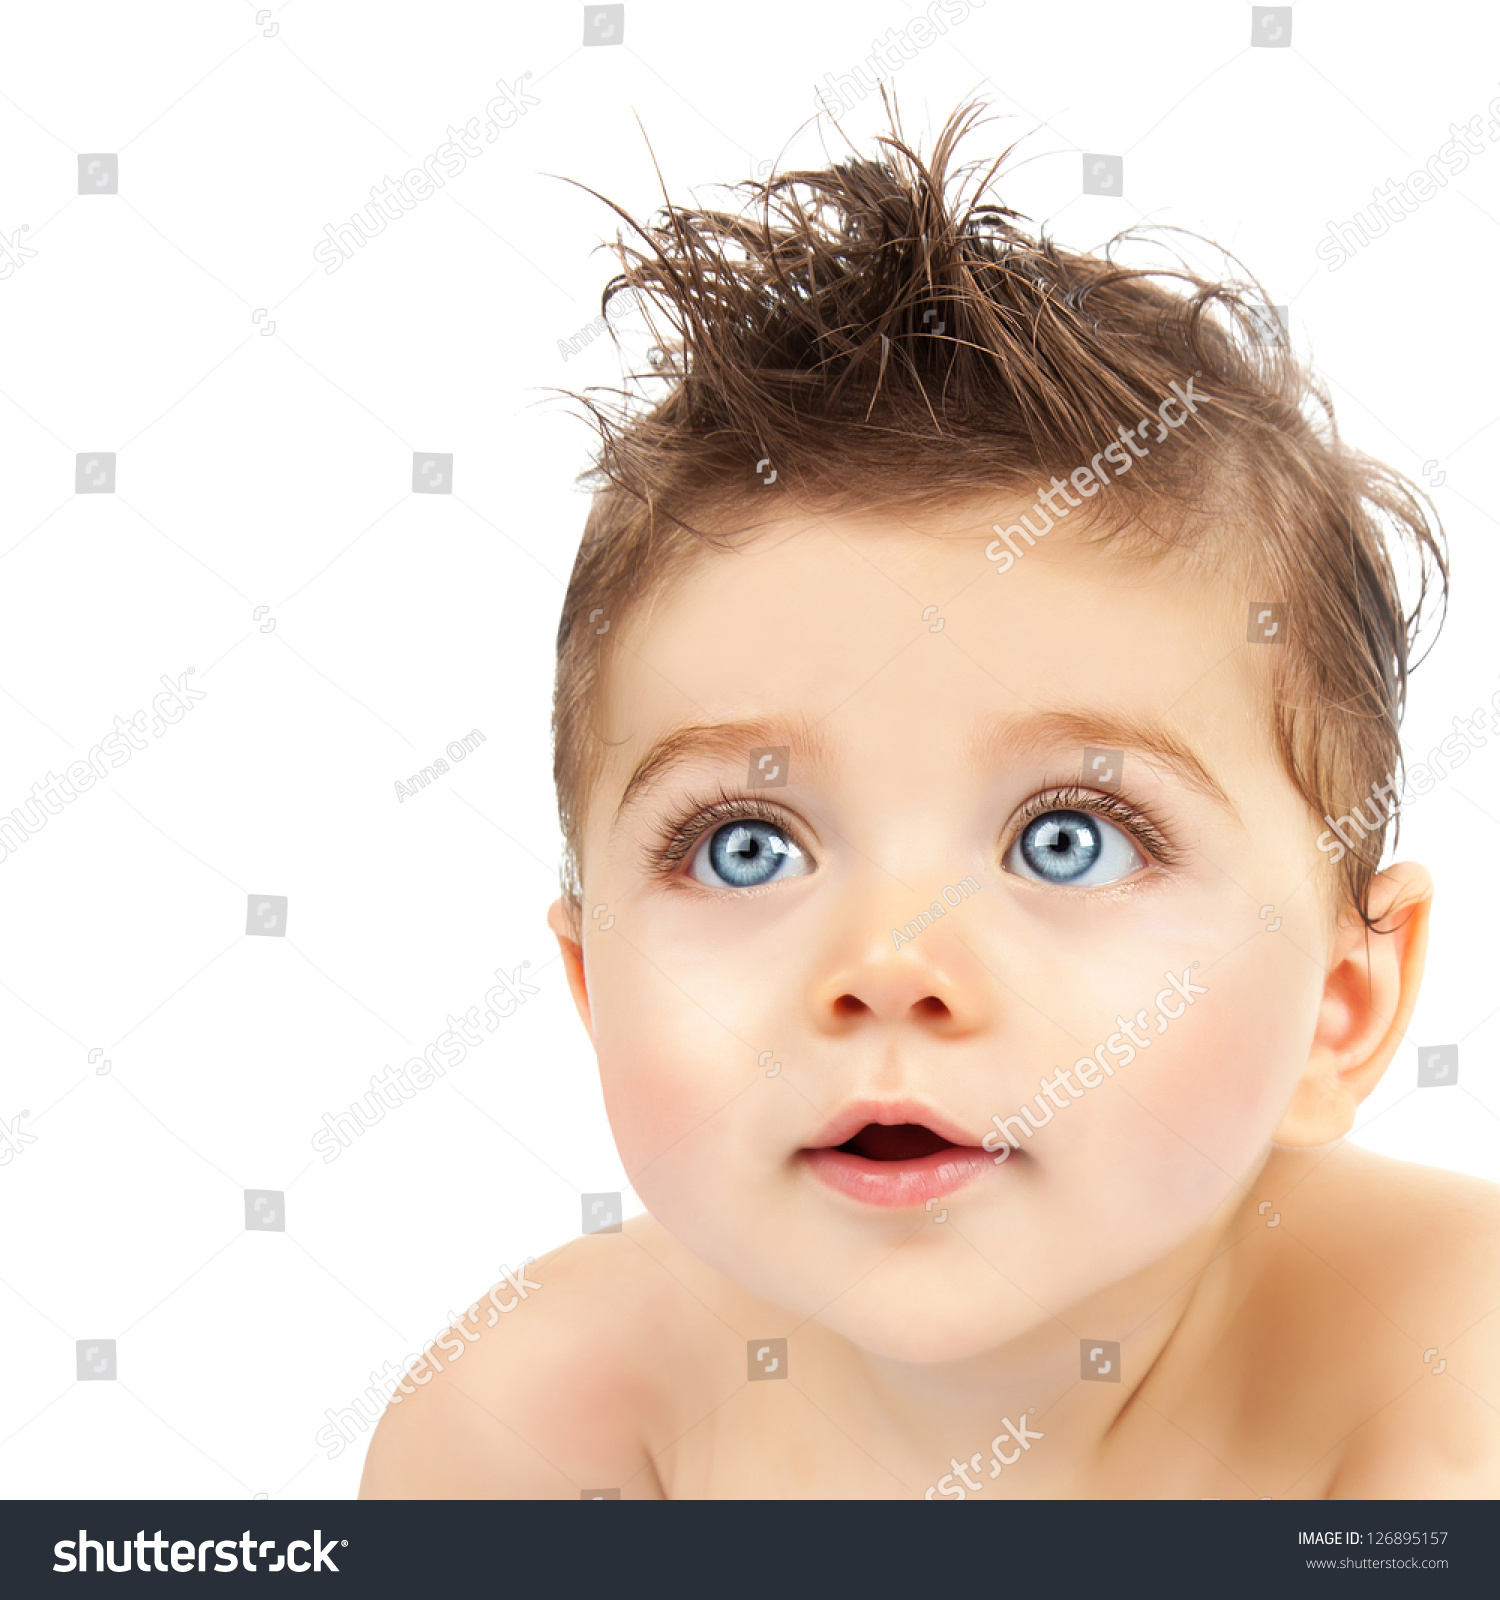 Image of cute baby boy, closeup portrait of adorable child isolated on white background, sweet toddler with blue eyes, healthy childhood, perfect caucasian infant, lovely kid, innocence concept #126895157